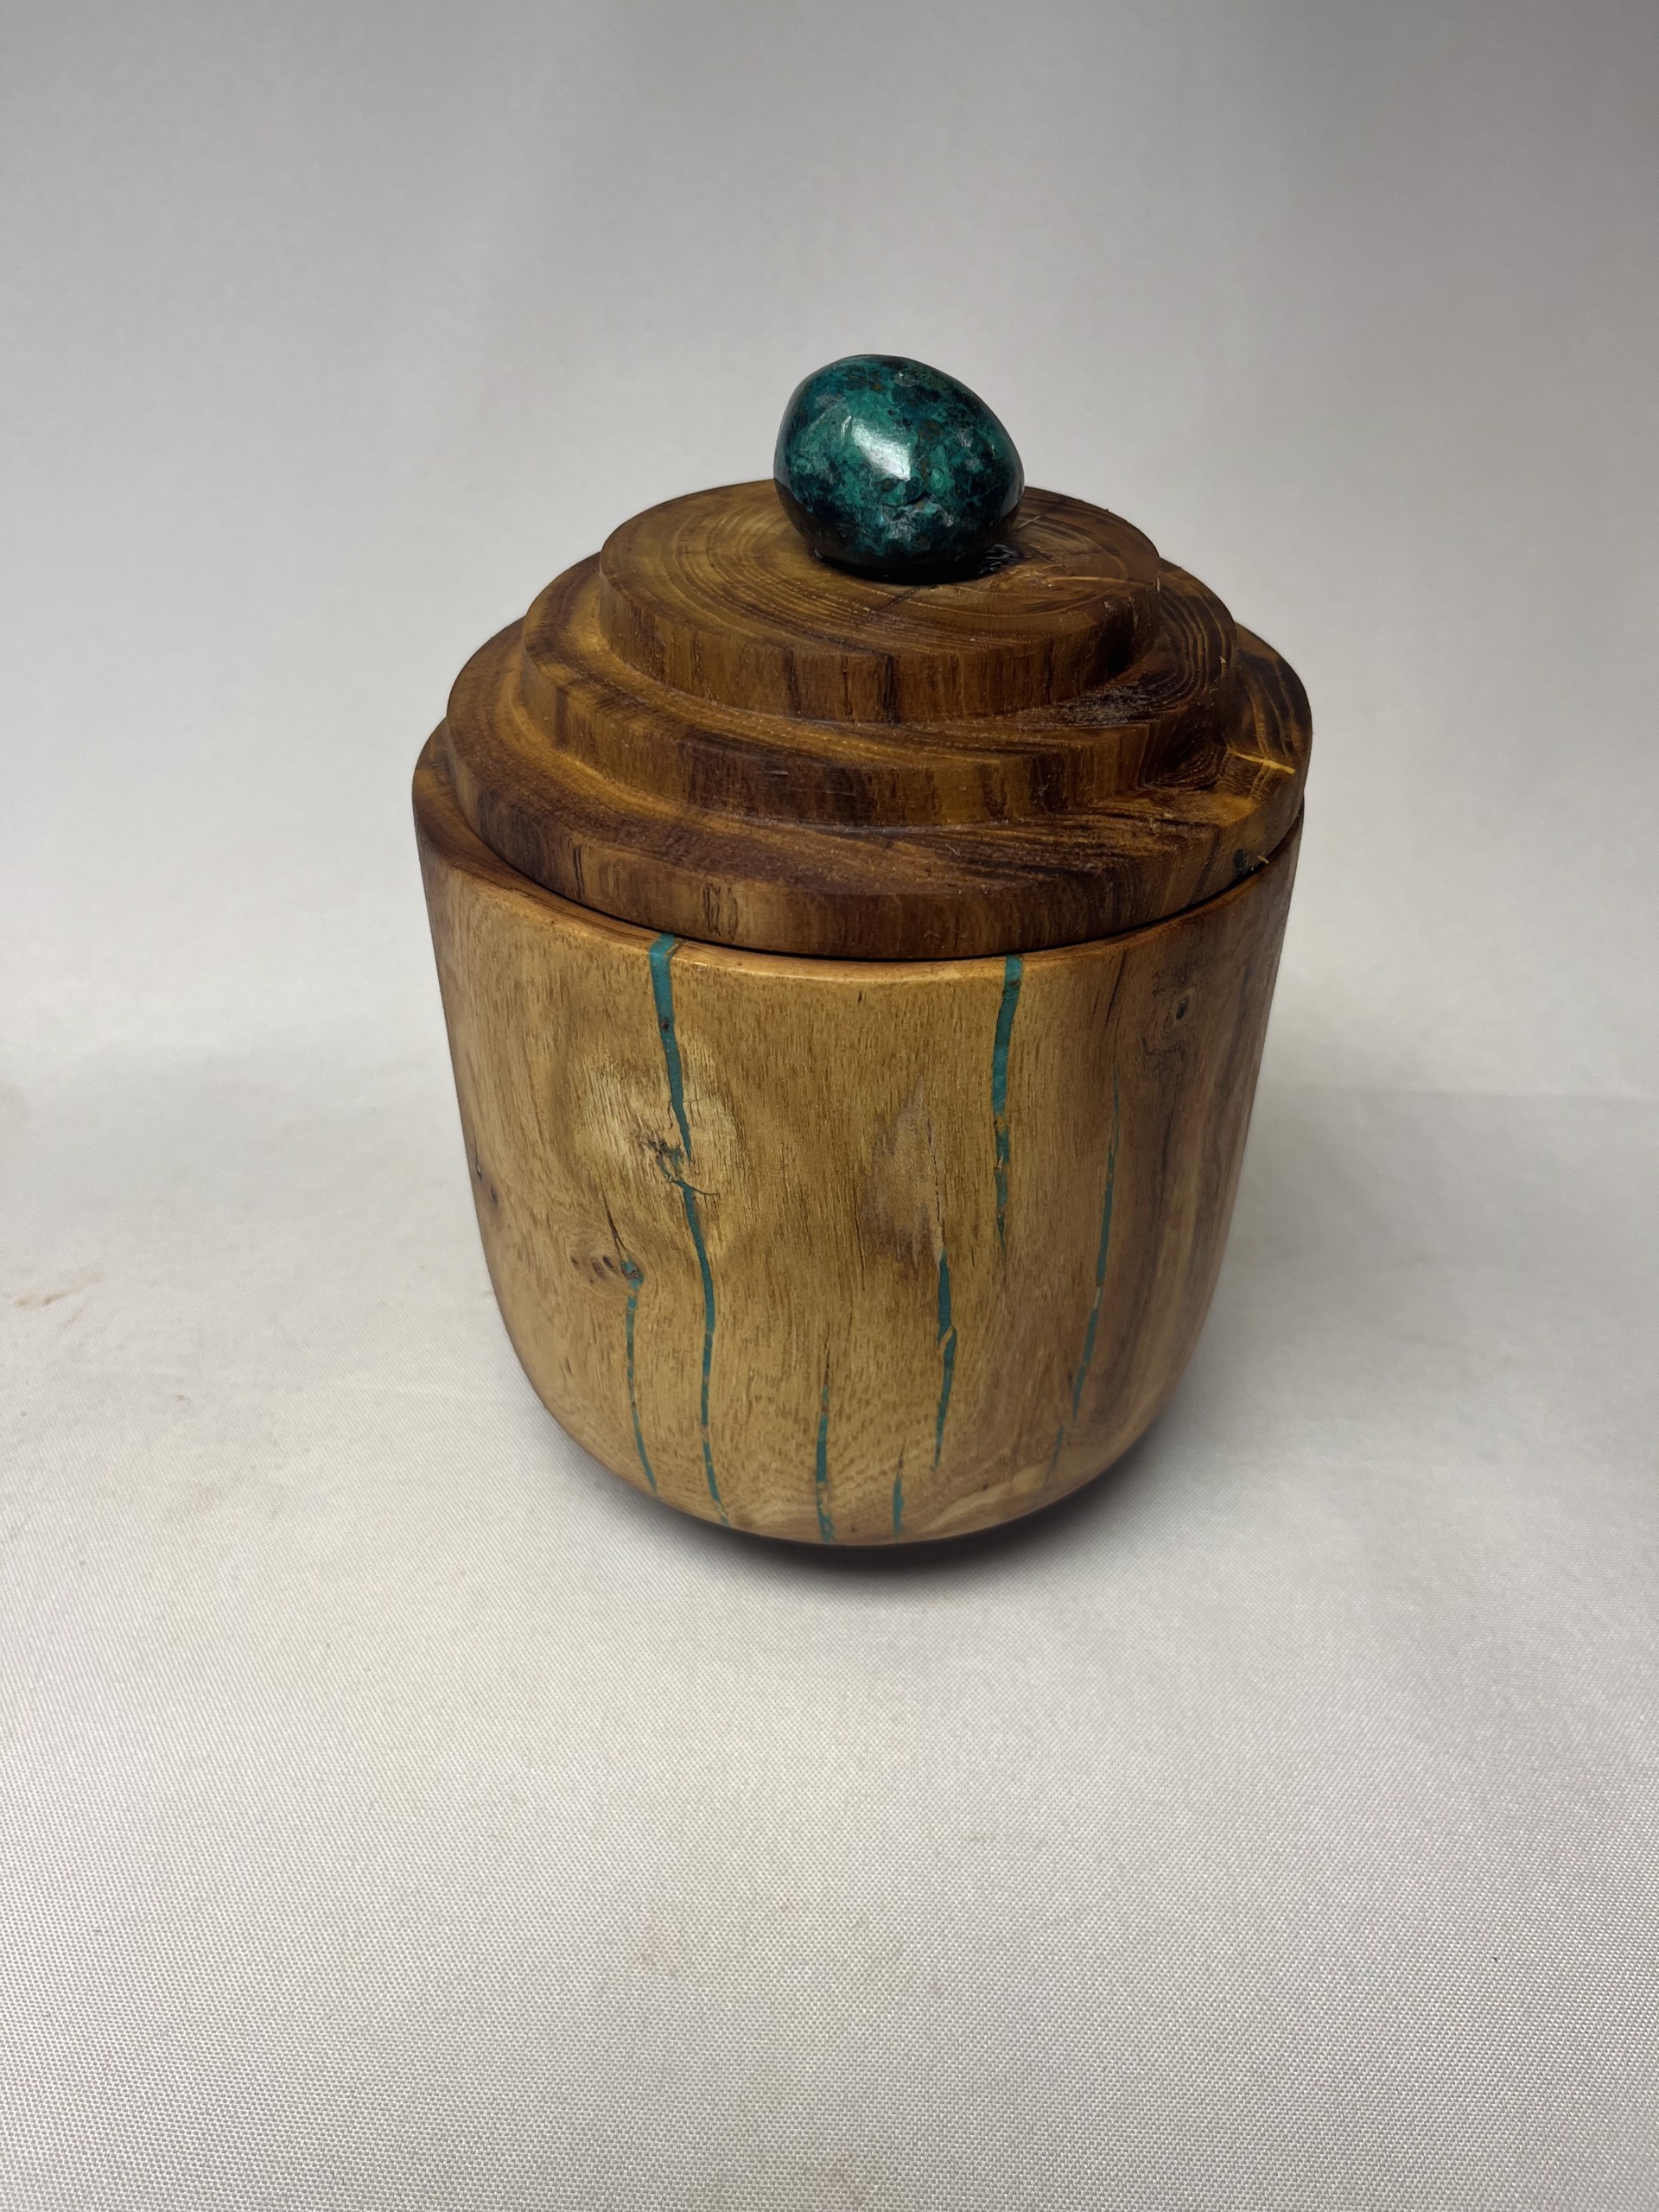 Turned Wood Jar W/Lid #22-81 by Rick Squires